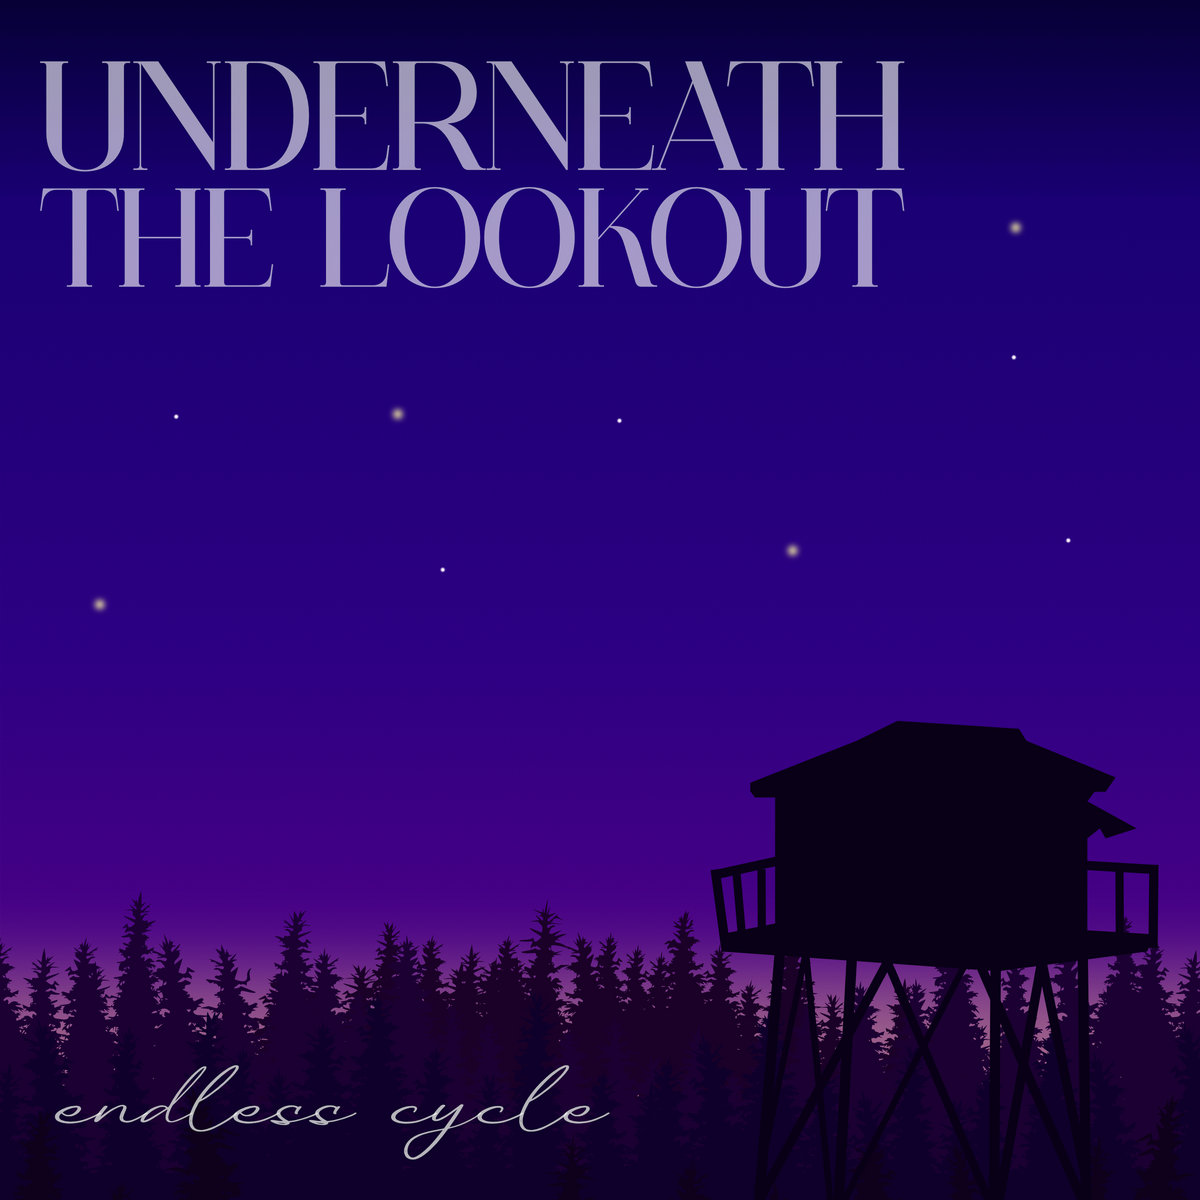 Single: Underneath the Lookout – Endless Cycle